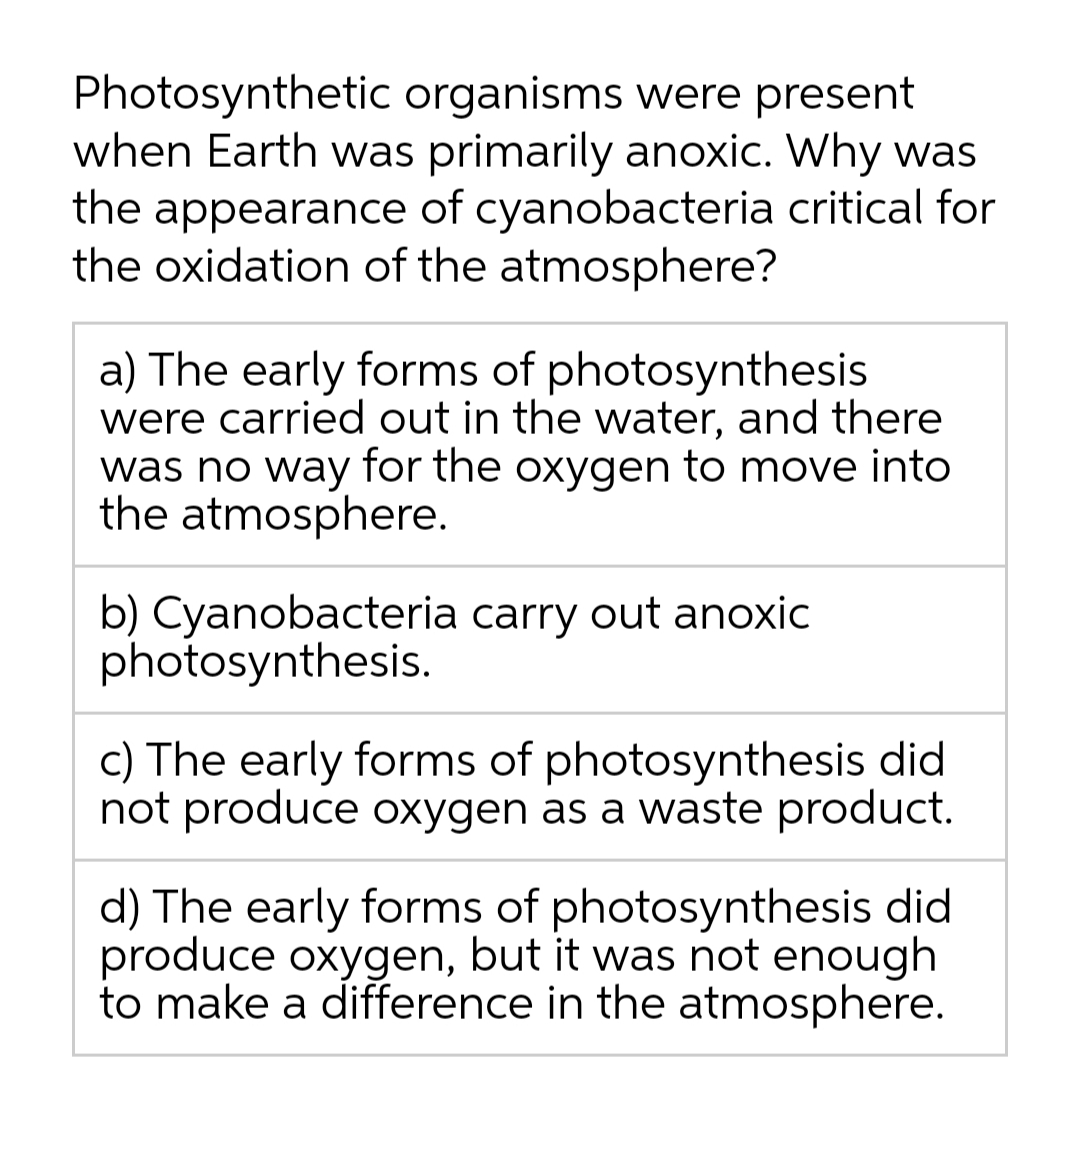 Photosynthetic organisms were present
when Earth was primarily anoxic. Why was
the appearance of cyanobacteria critical for
the oxidation of the atmosphere?
a) The early forms of photosynthesis
were carried out in the water, and there
was no way for the oxygen to move into
the atmosphere.
b) Cyanobacteria carry out anoxic
photosynthesis.
c) The early forms of photosynthesis did
not produce oxygen as a waste product.
d) The early forms of photosynthesis did
produce oxygen, but it was not enough
to make a difference in the atmosphere.
